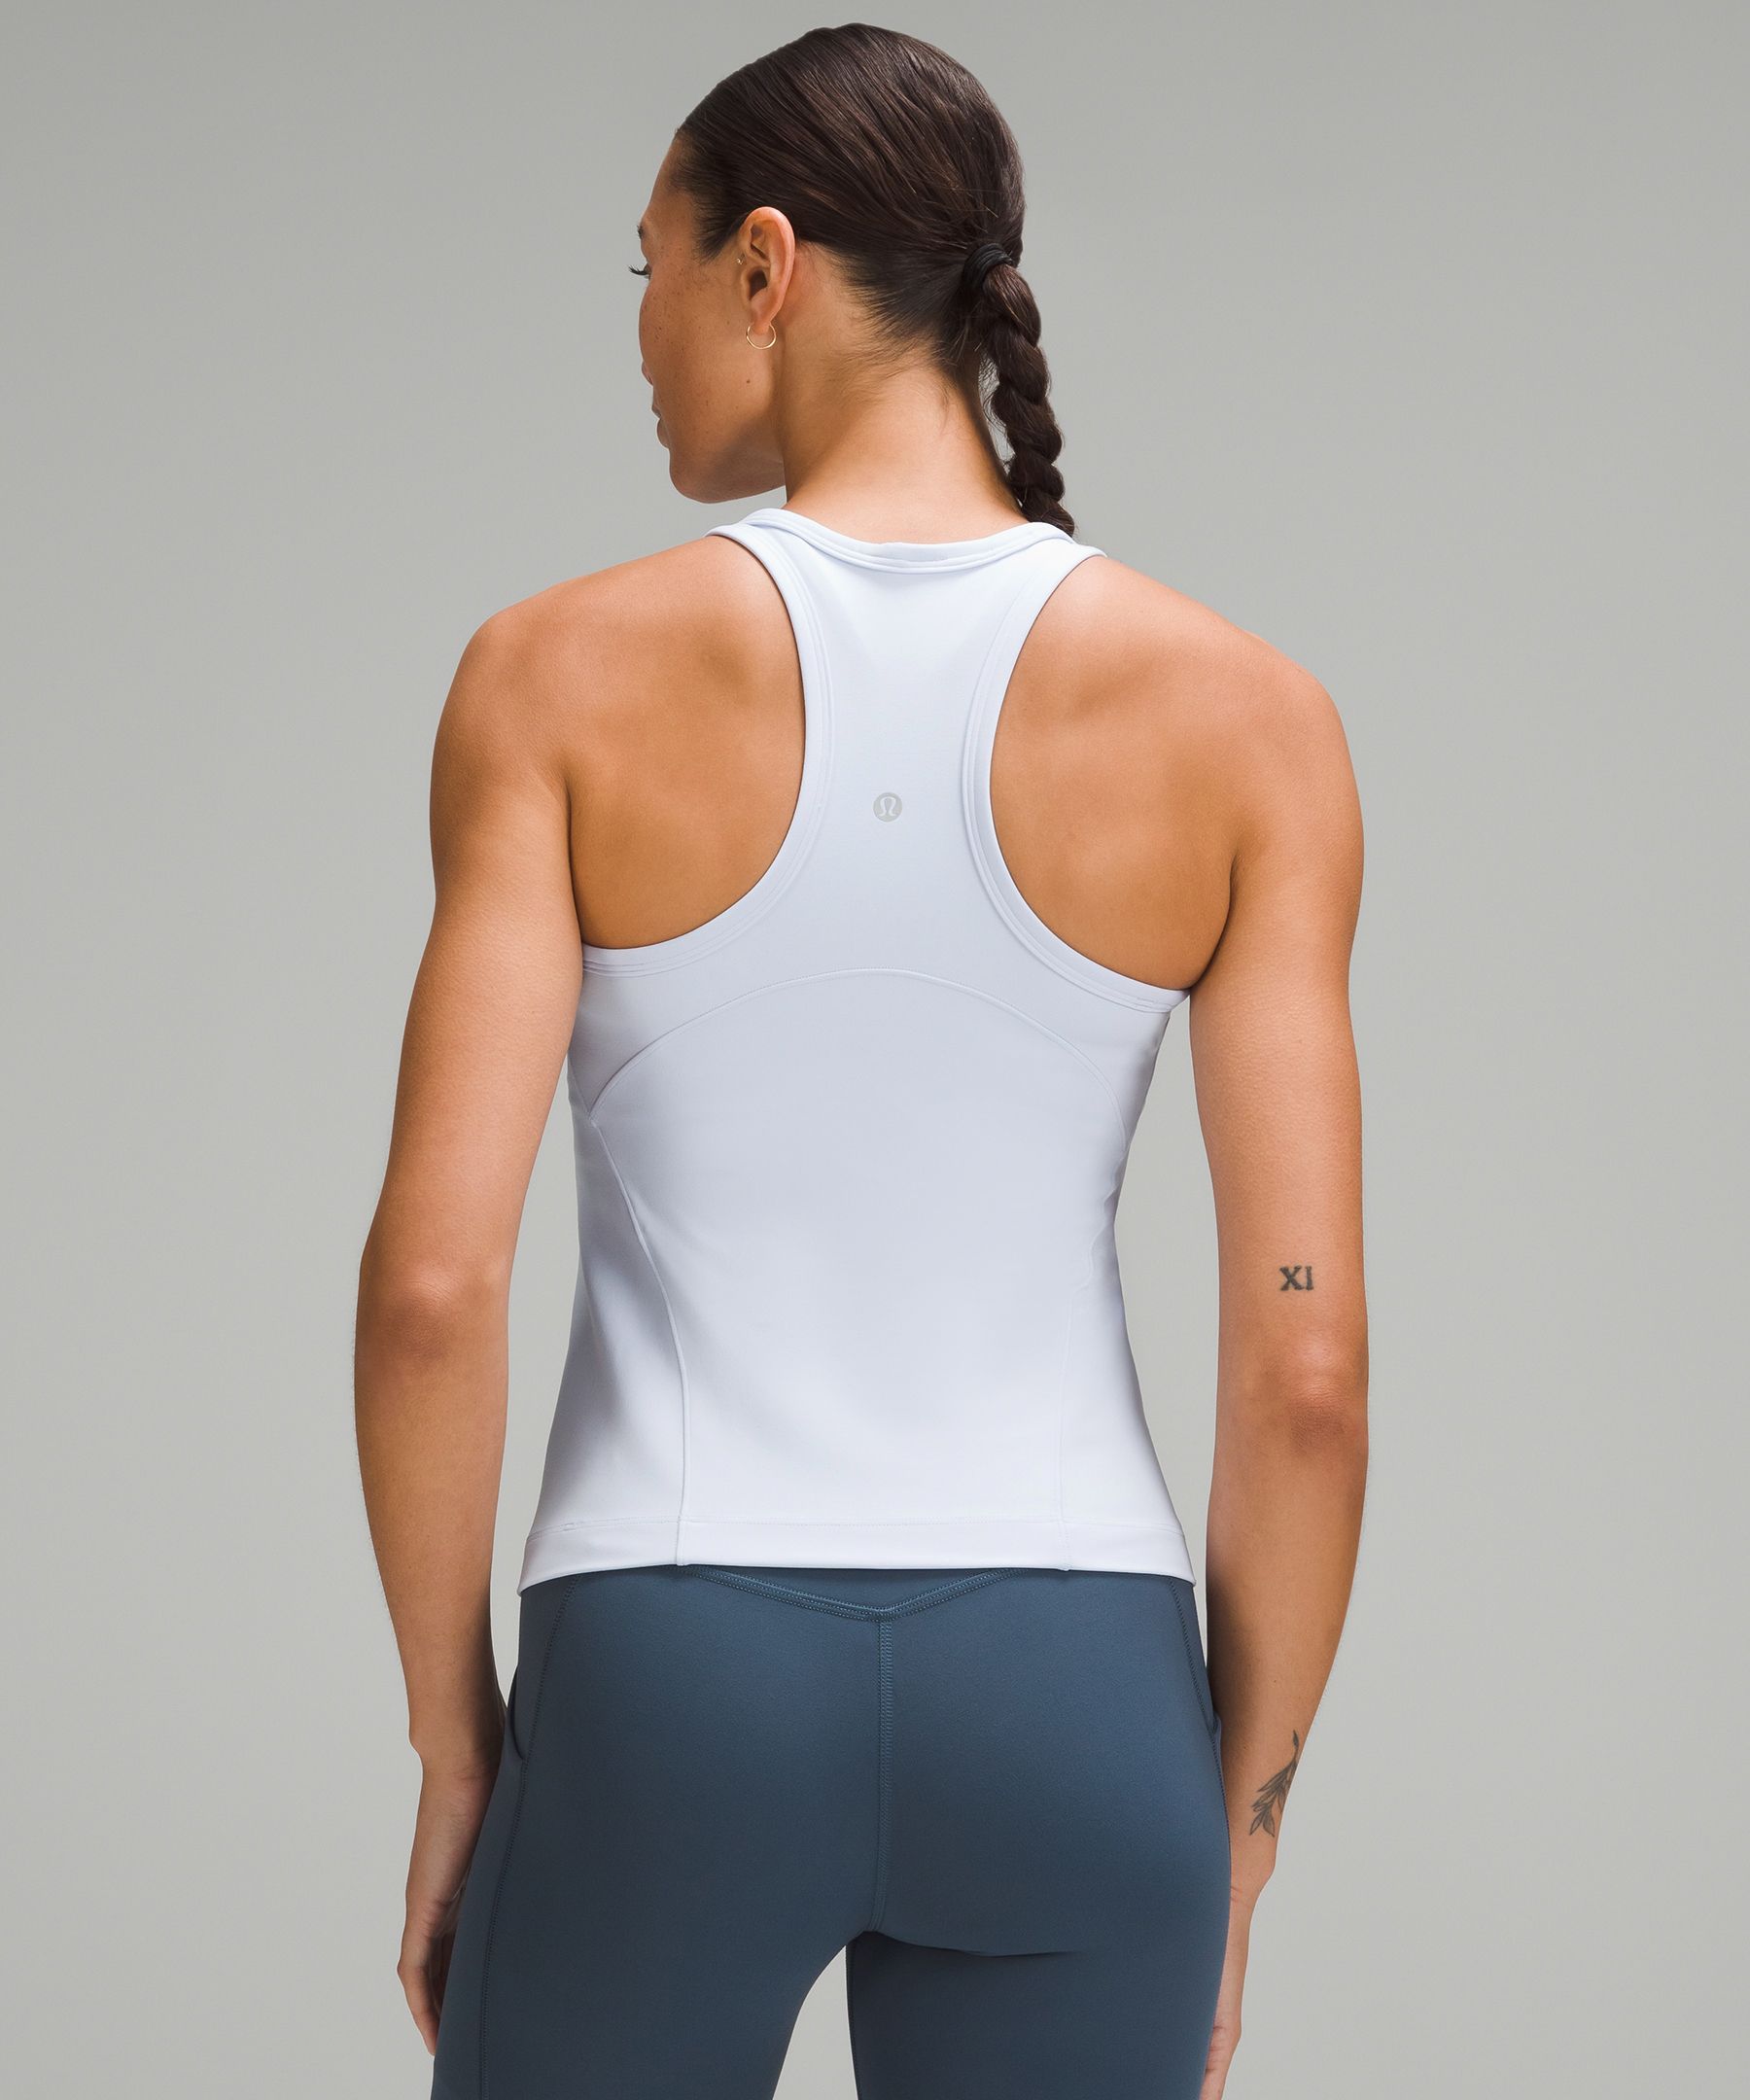 Today's yoga flow fit💙 Align Jogger in True Navy (8) and Swiftly Tech  Racerback 2.0 *Race Length in Serene Blue (6) : r/lululemon